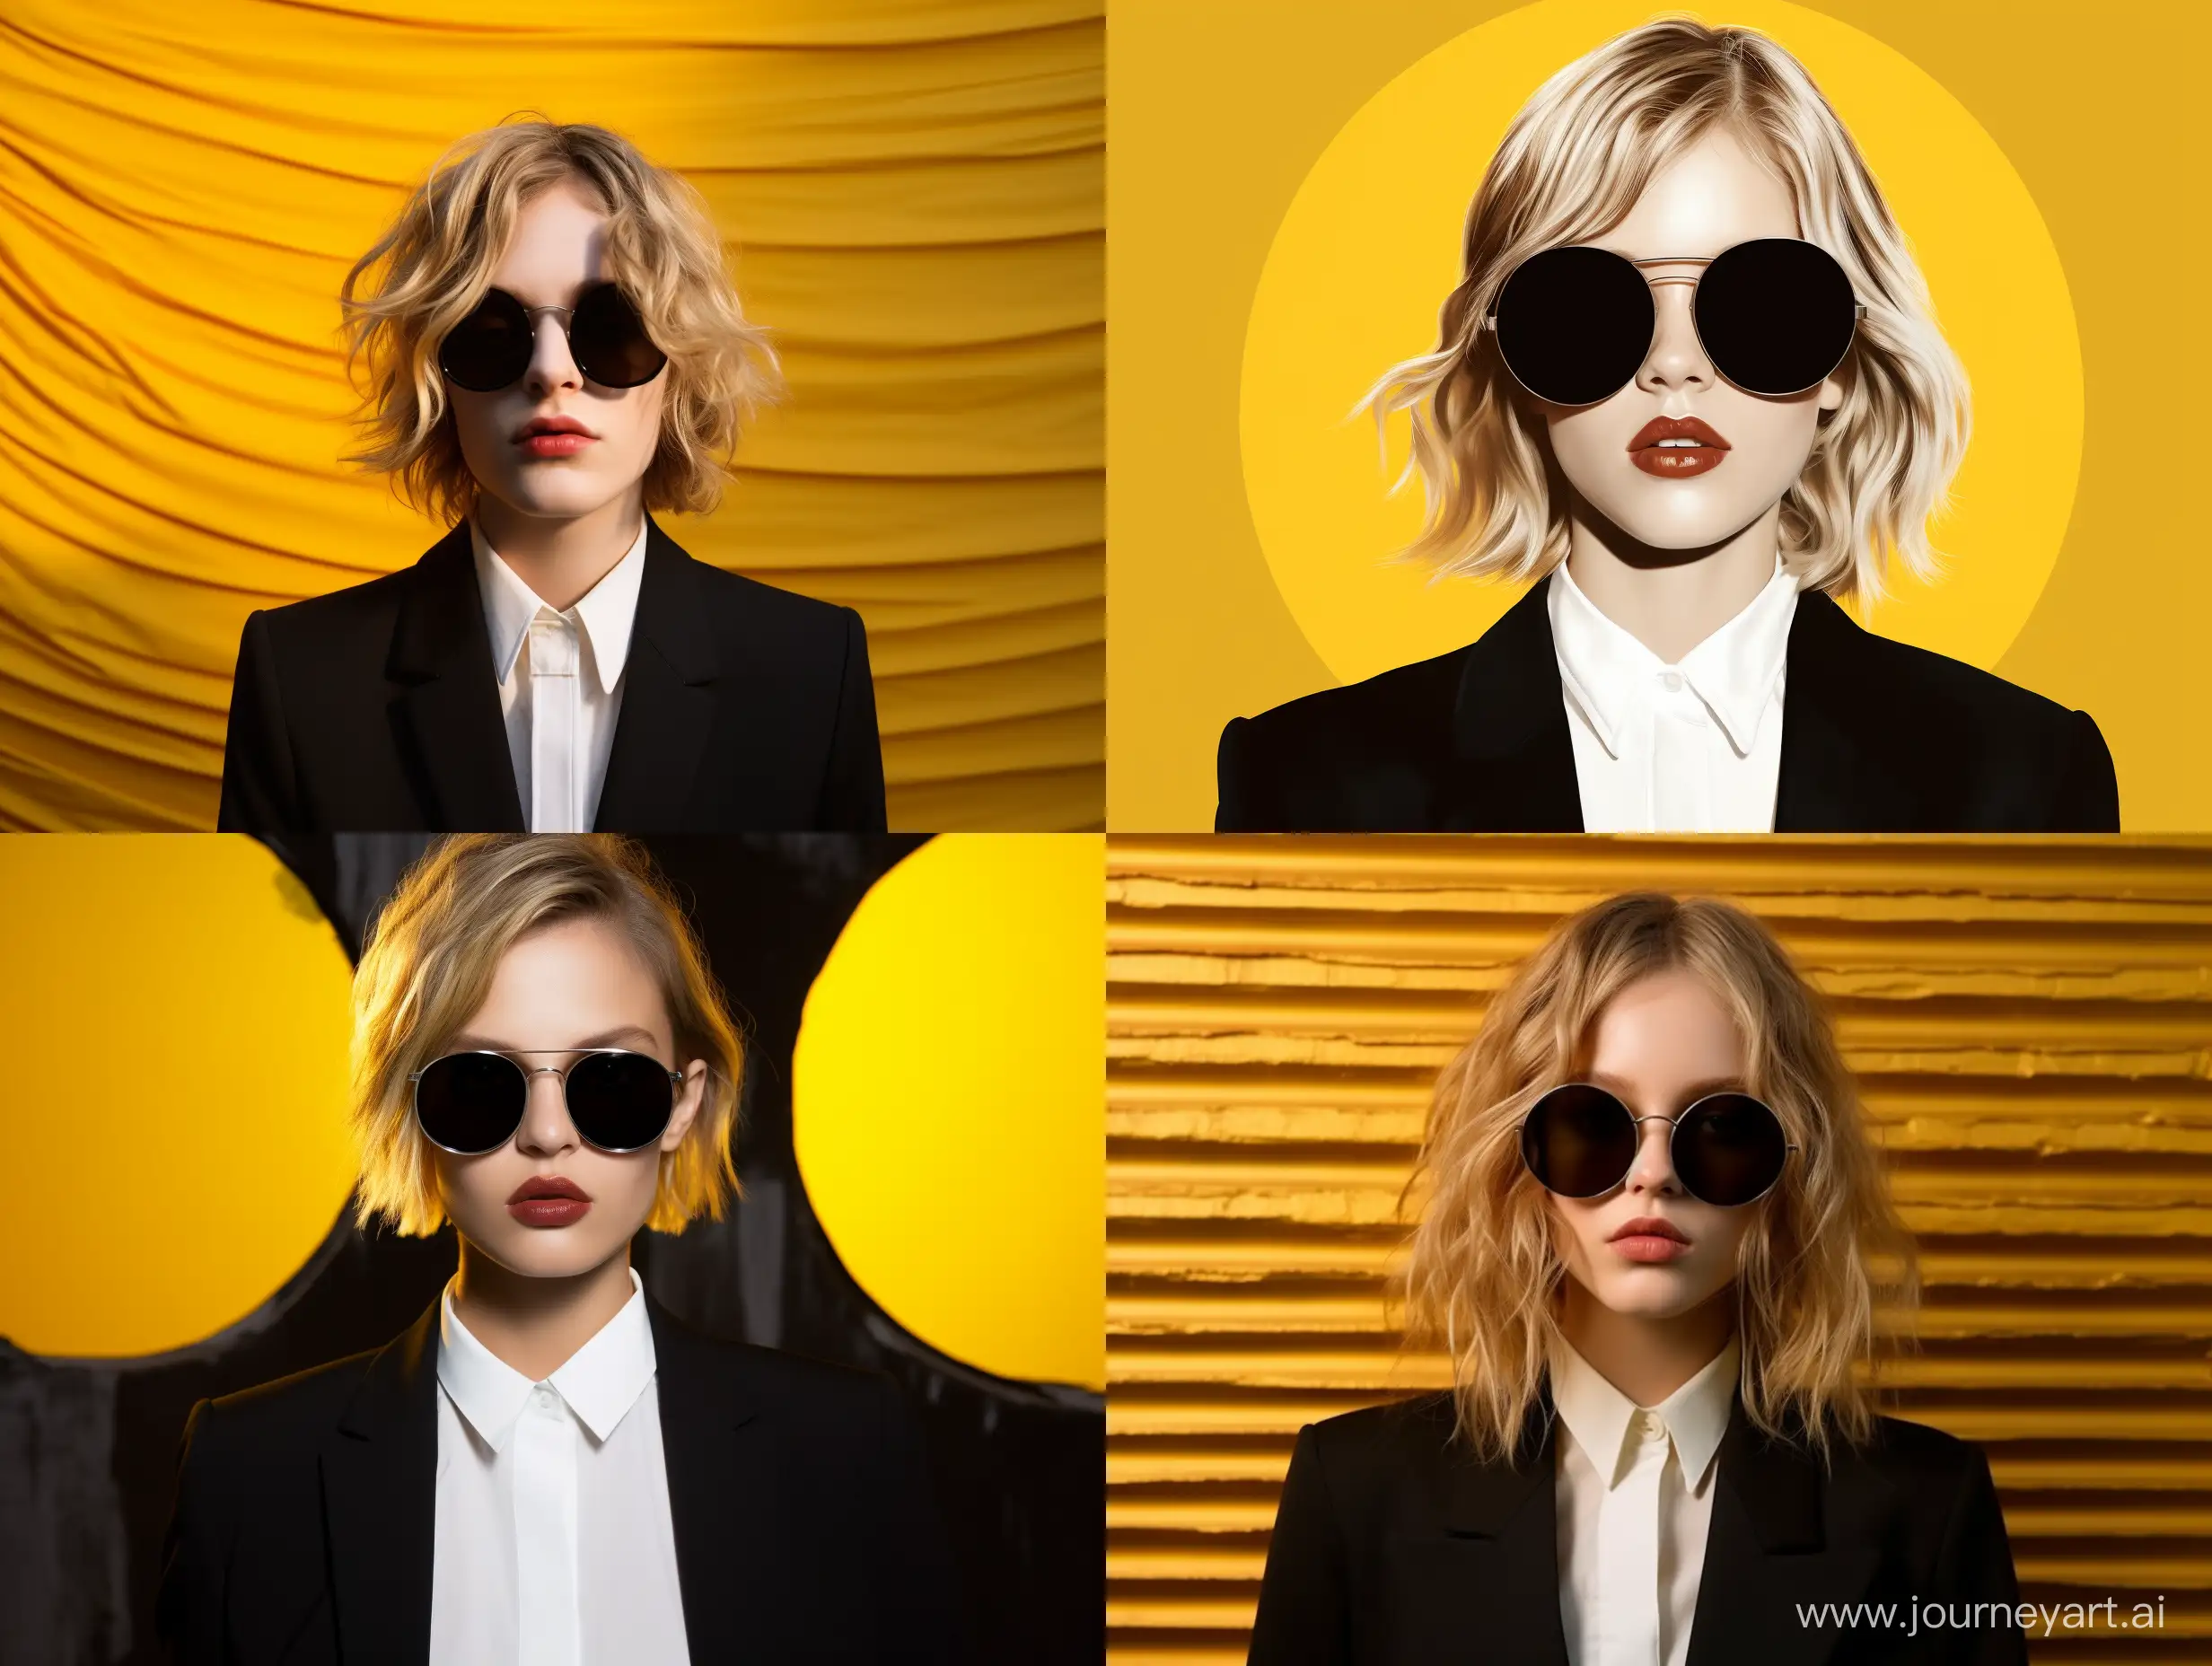 Stylish-Blonde-Girl-in-Formal-Black-Suit-and-Yellow-Sunglasses